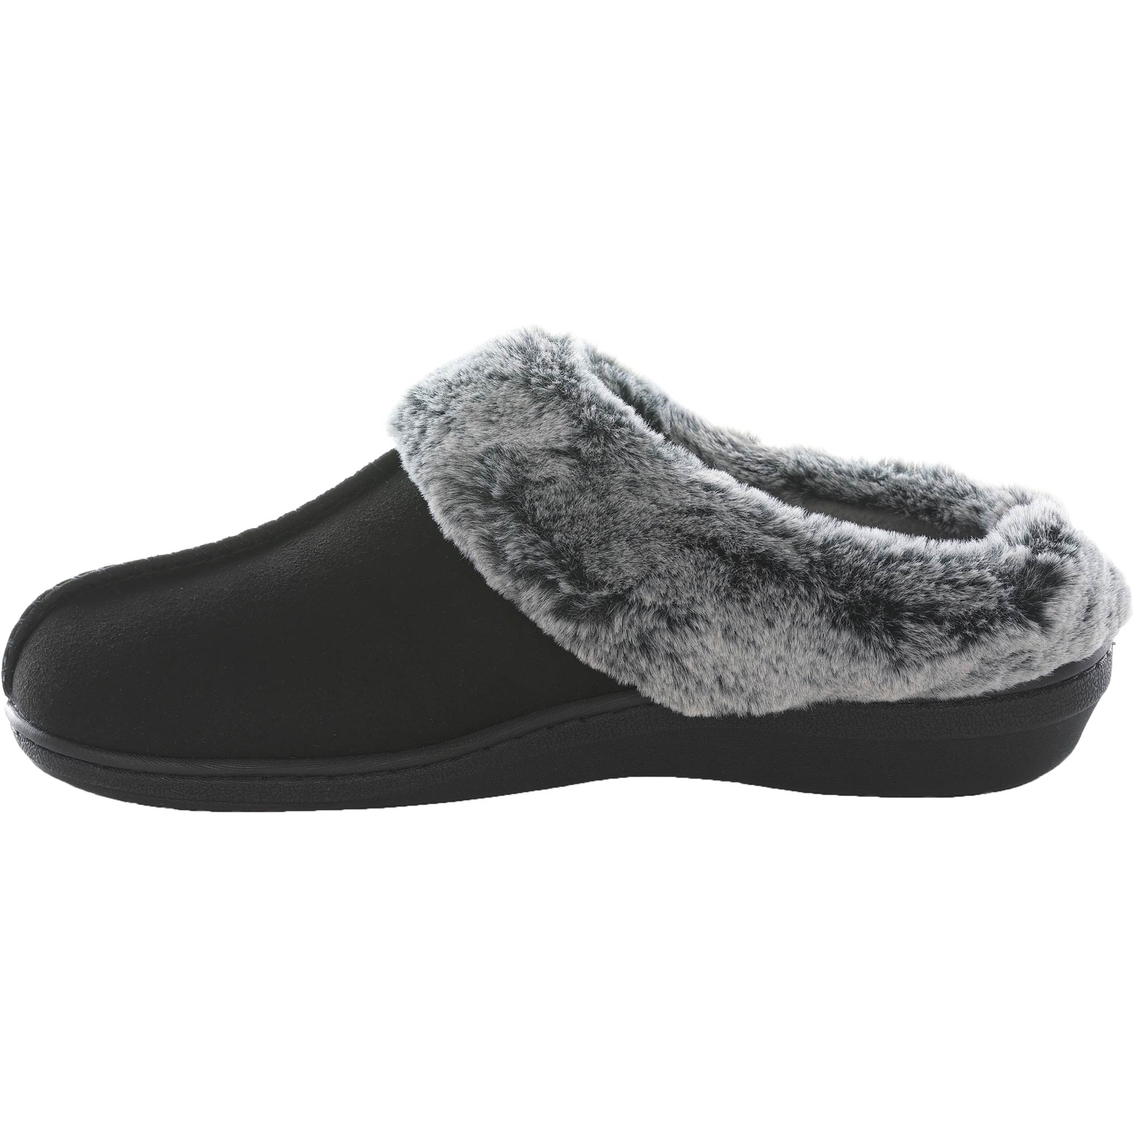 Powerstep Women's Clog Slippers - Image 3 of 7